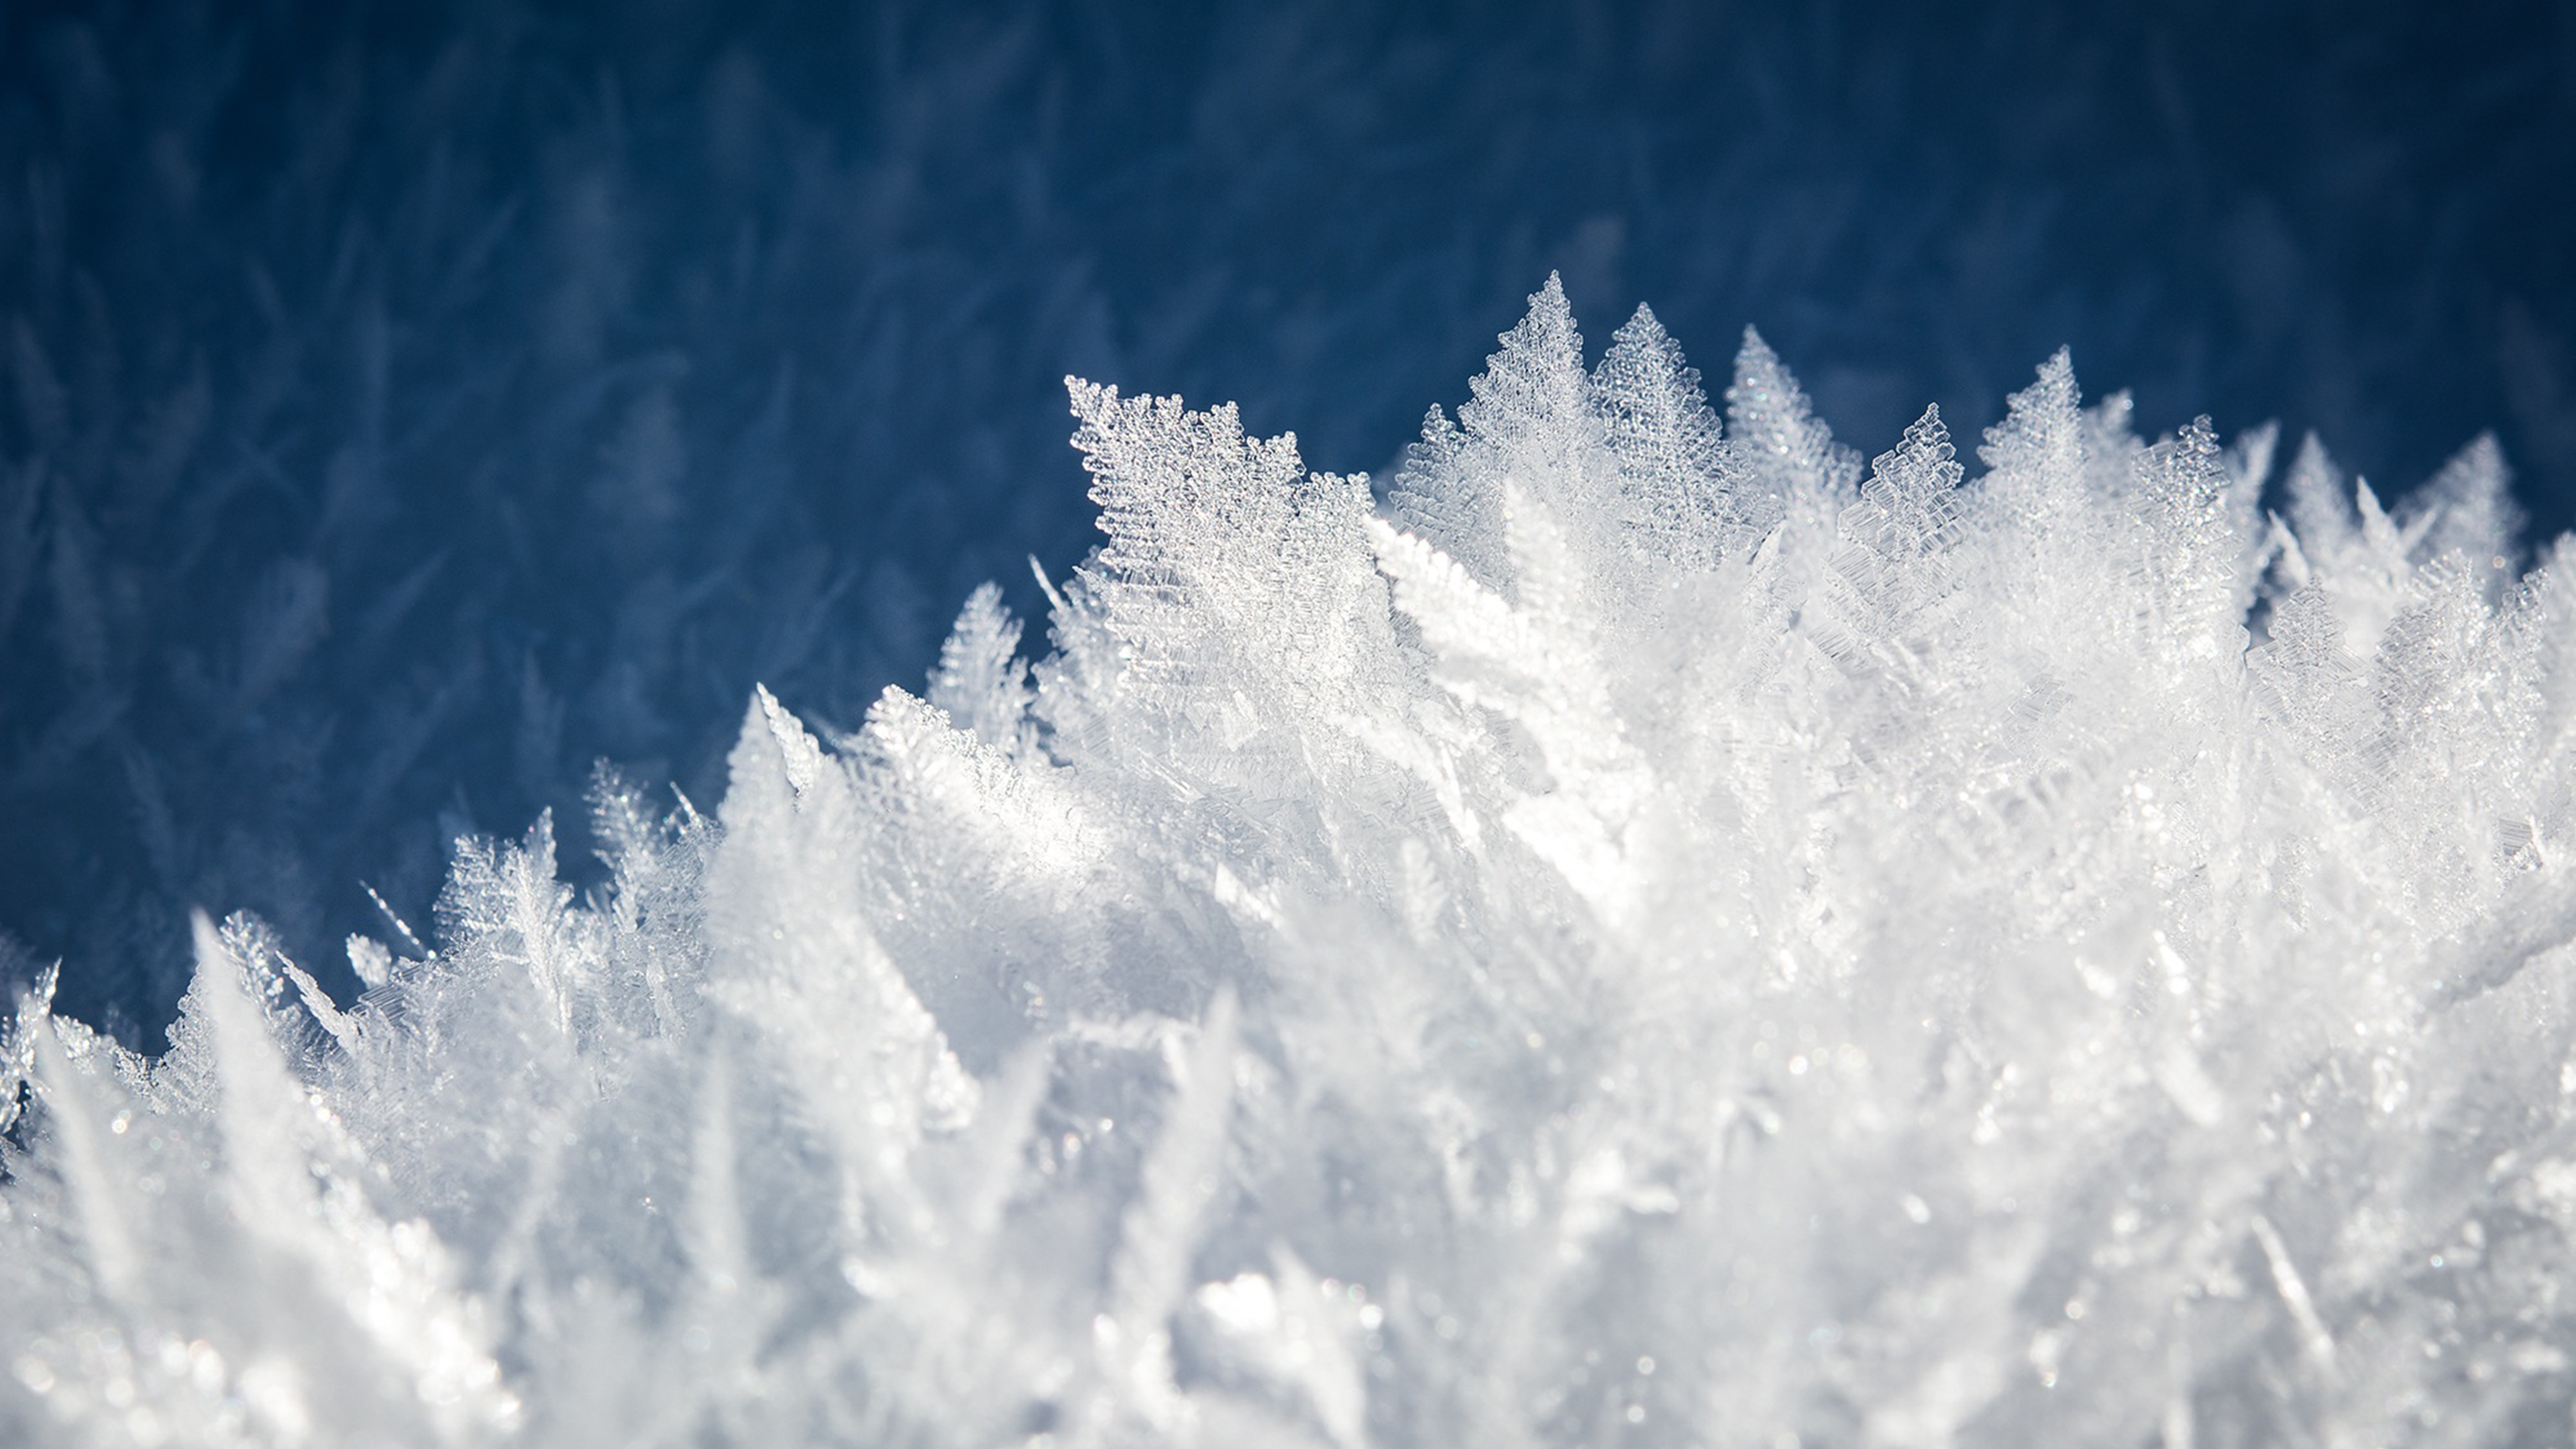 Free Ice Crystals ChromeBook Wallpaper Ready For Download